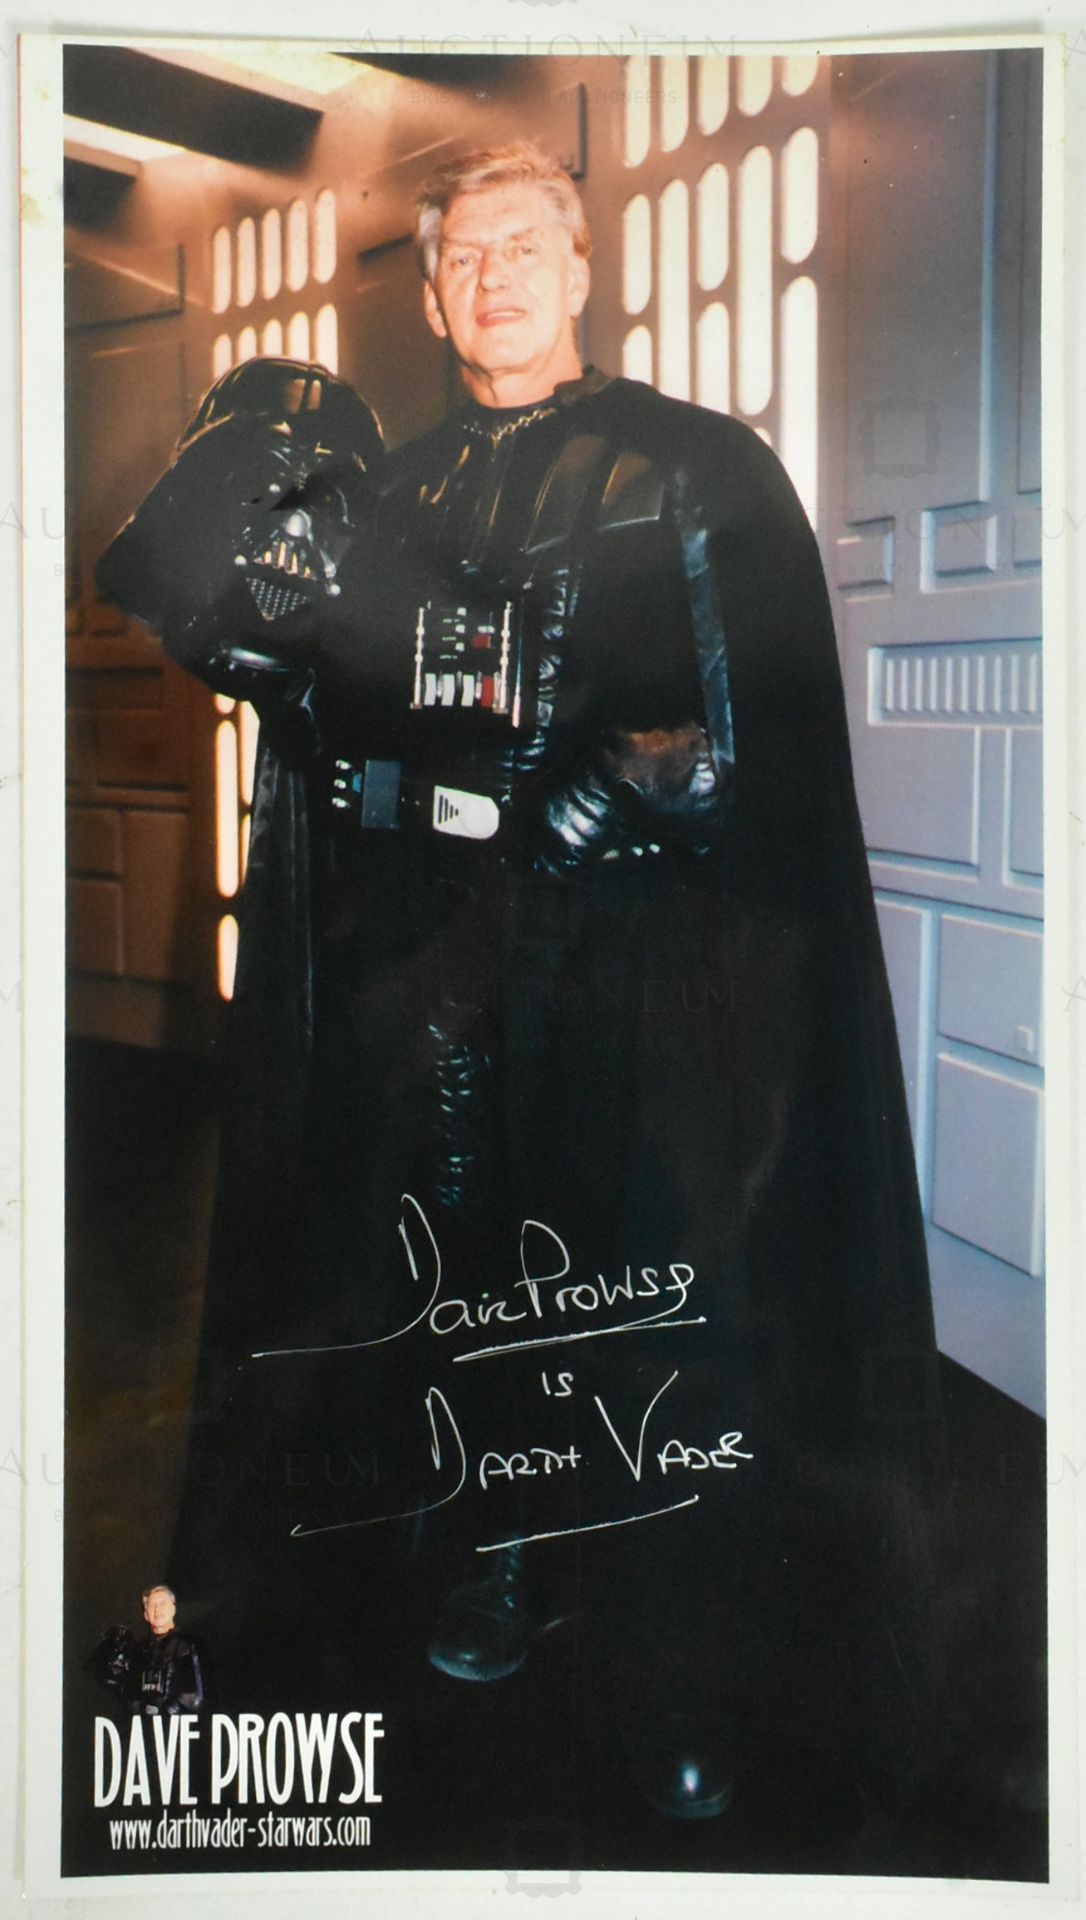 STAR WARS - DAVE PROWSE DARTH VADER - SIGNED 8X14" PHOTO